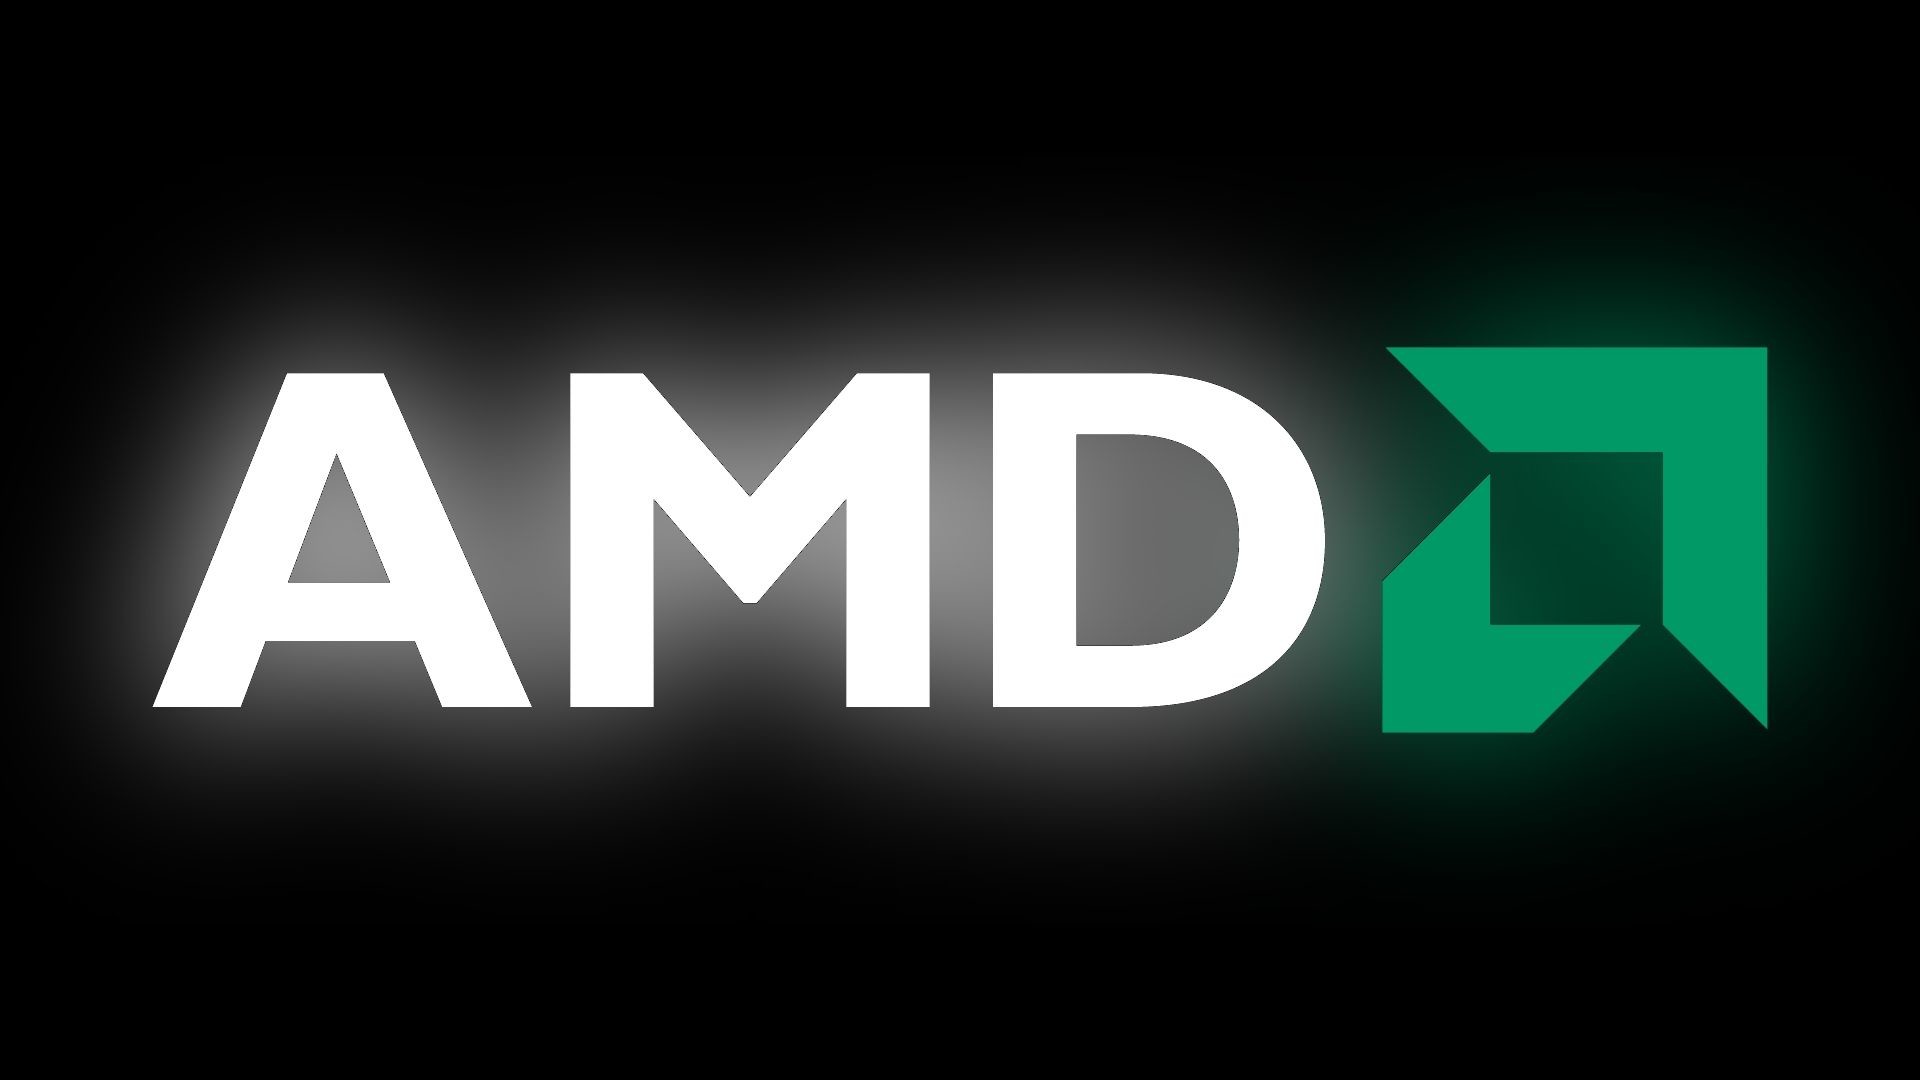 1920x1080 wallpaper.wiki-Image-of-Amd-Fx--PIC-